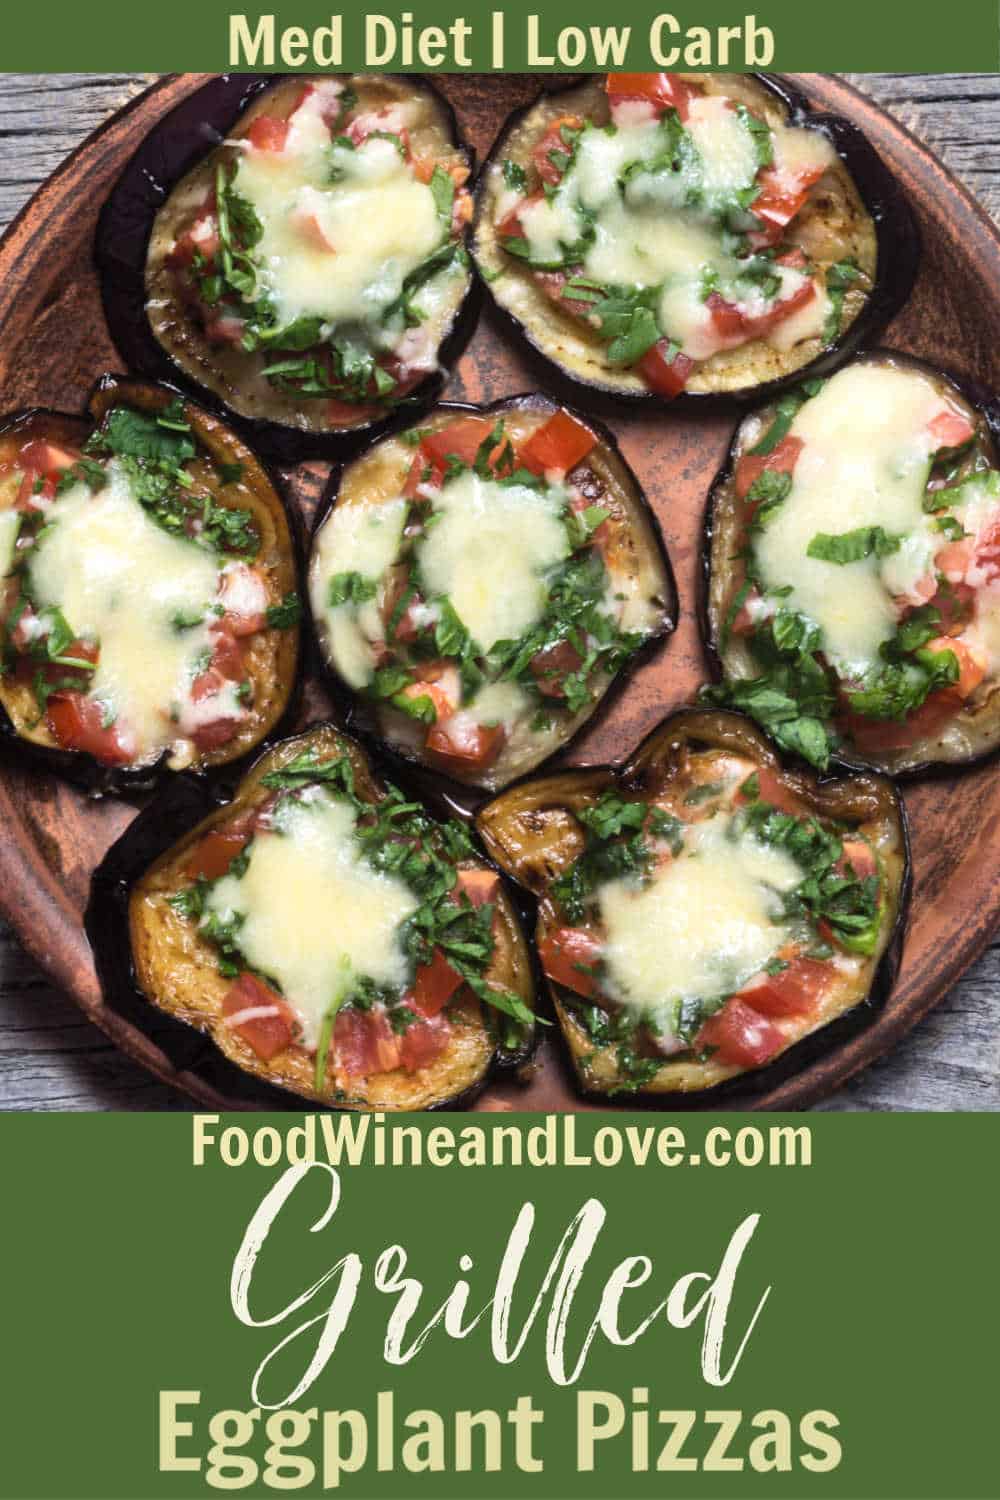 Easy Grilled Eggplant Pizzas